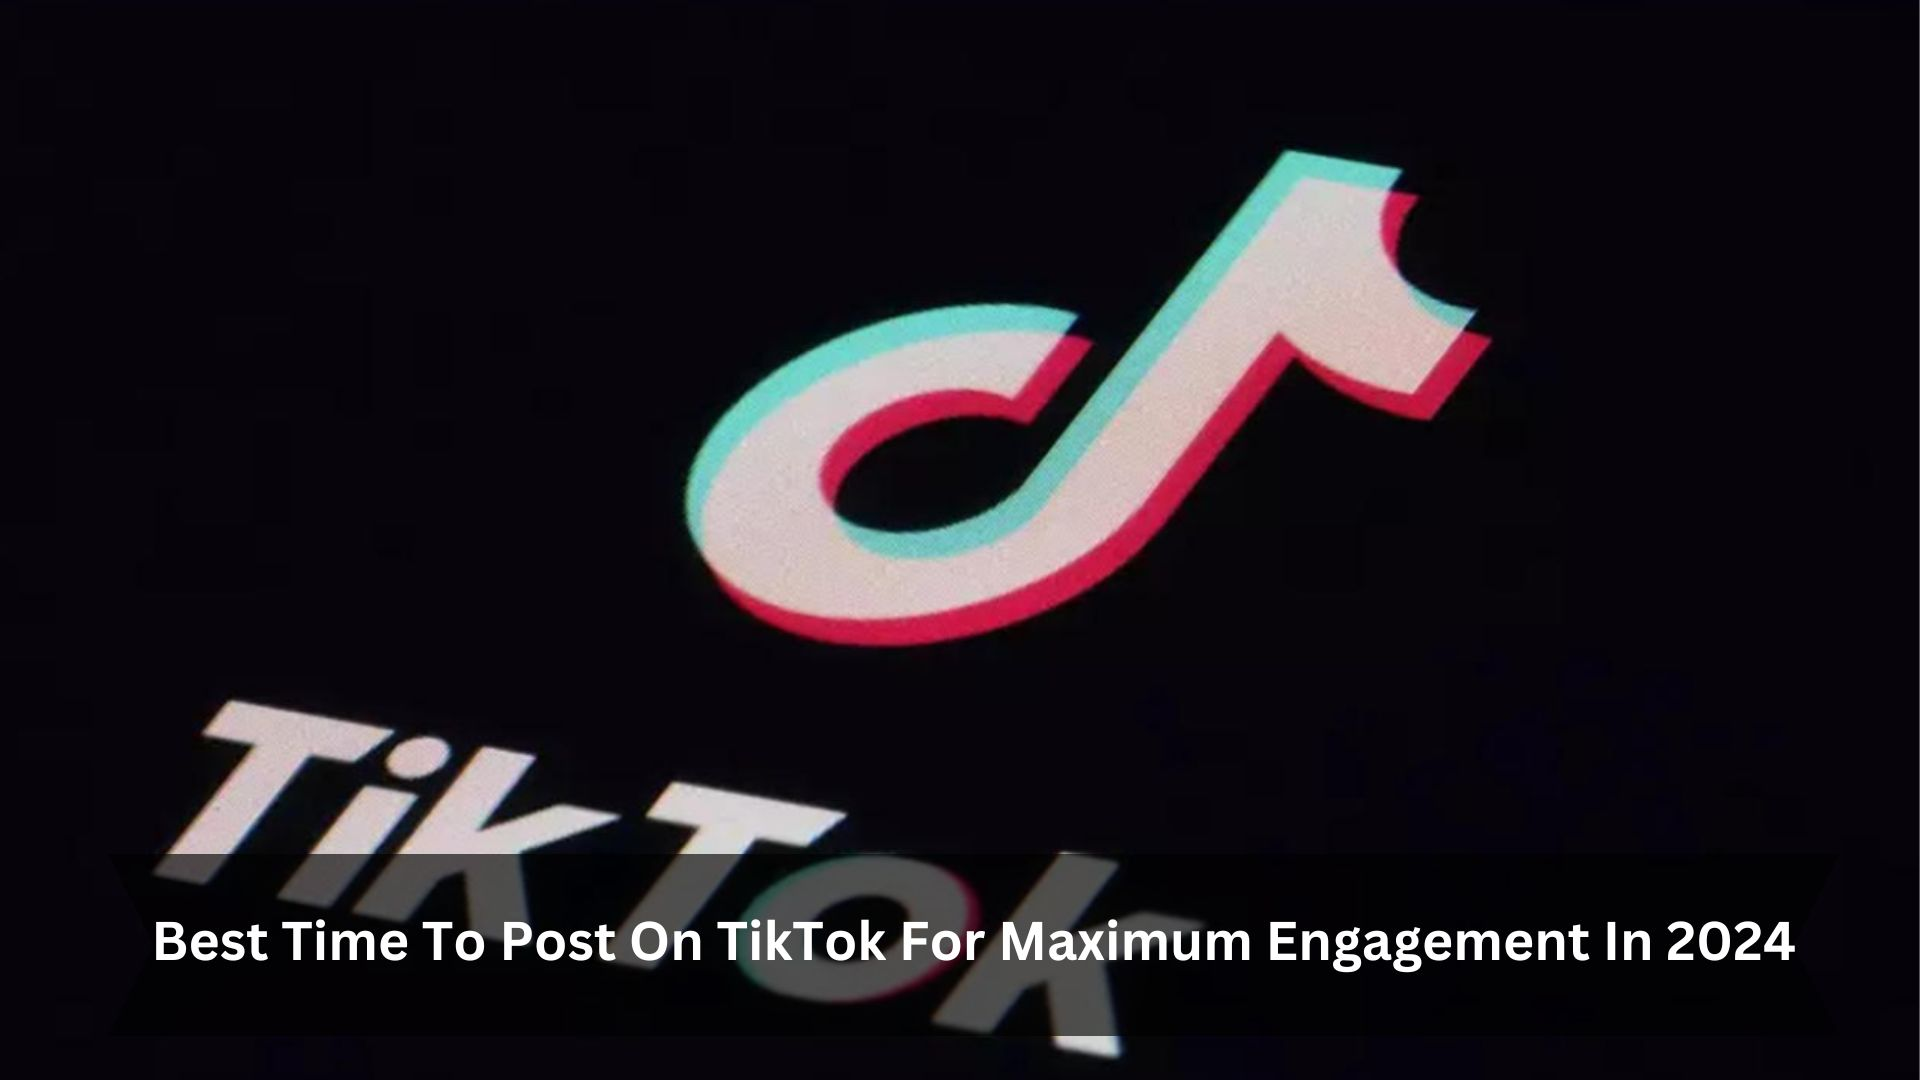 Best Time To Post On TikTok For Maximum Engagement In 2024